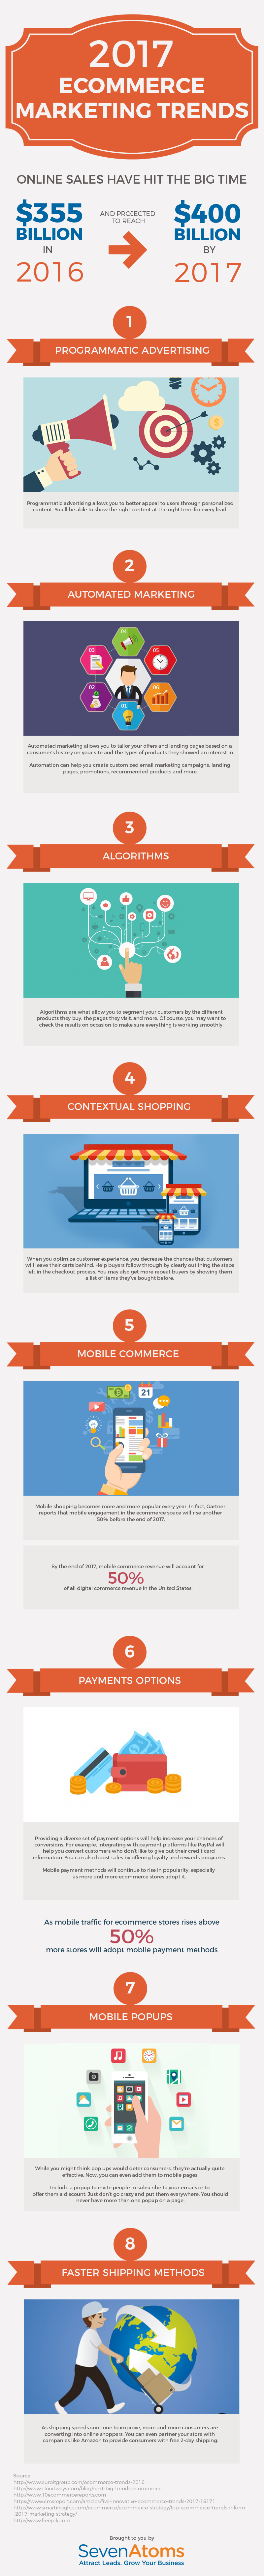 Ecommerce-Trends-Infographic